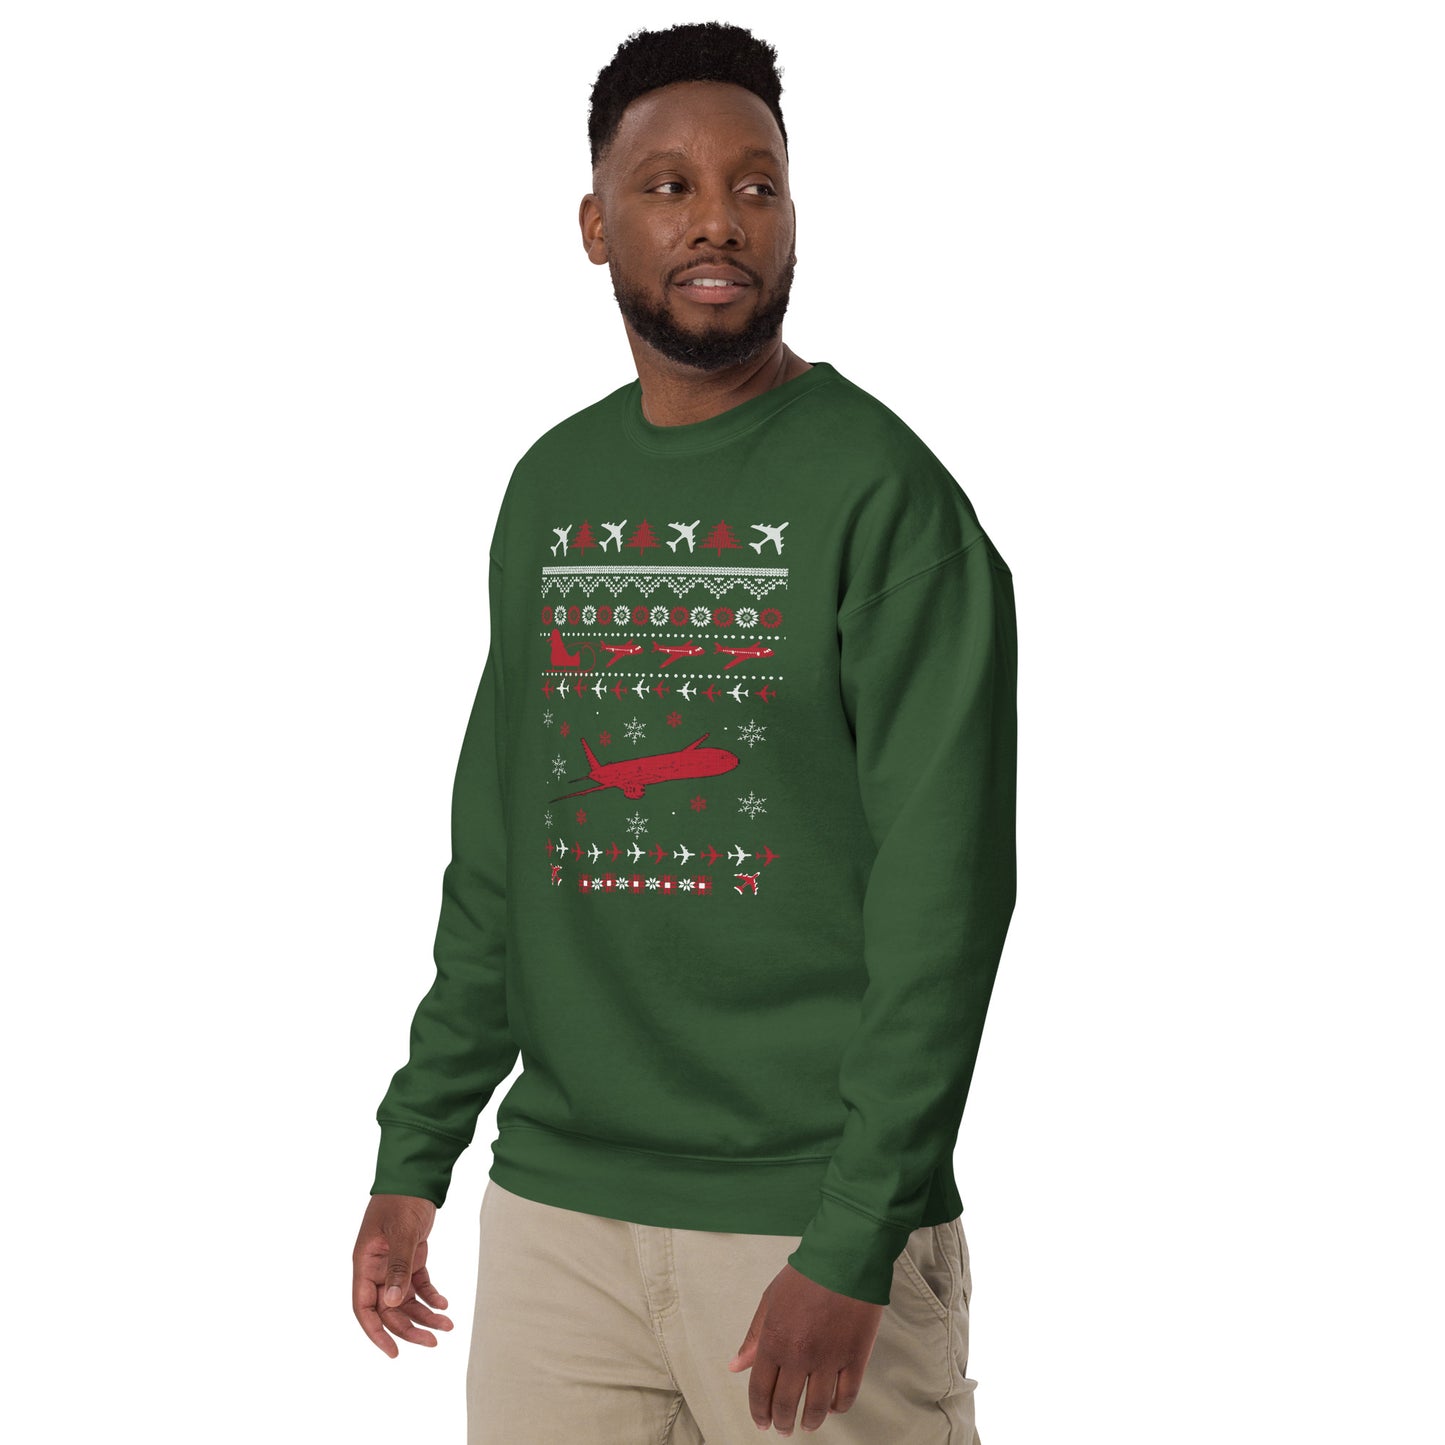 Ugly Christmas Sweater by Passenger Shaming - UNISEX - Green